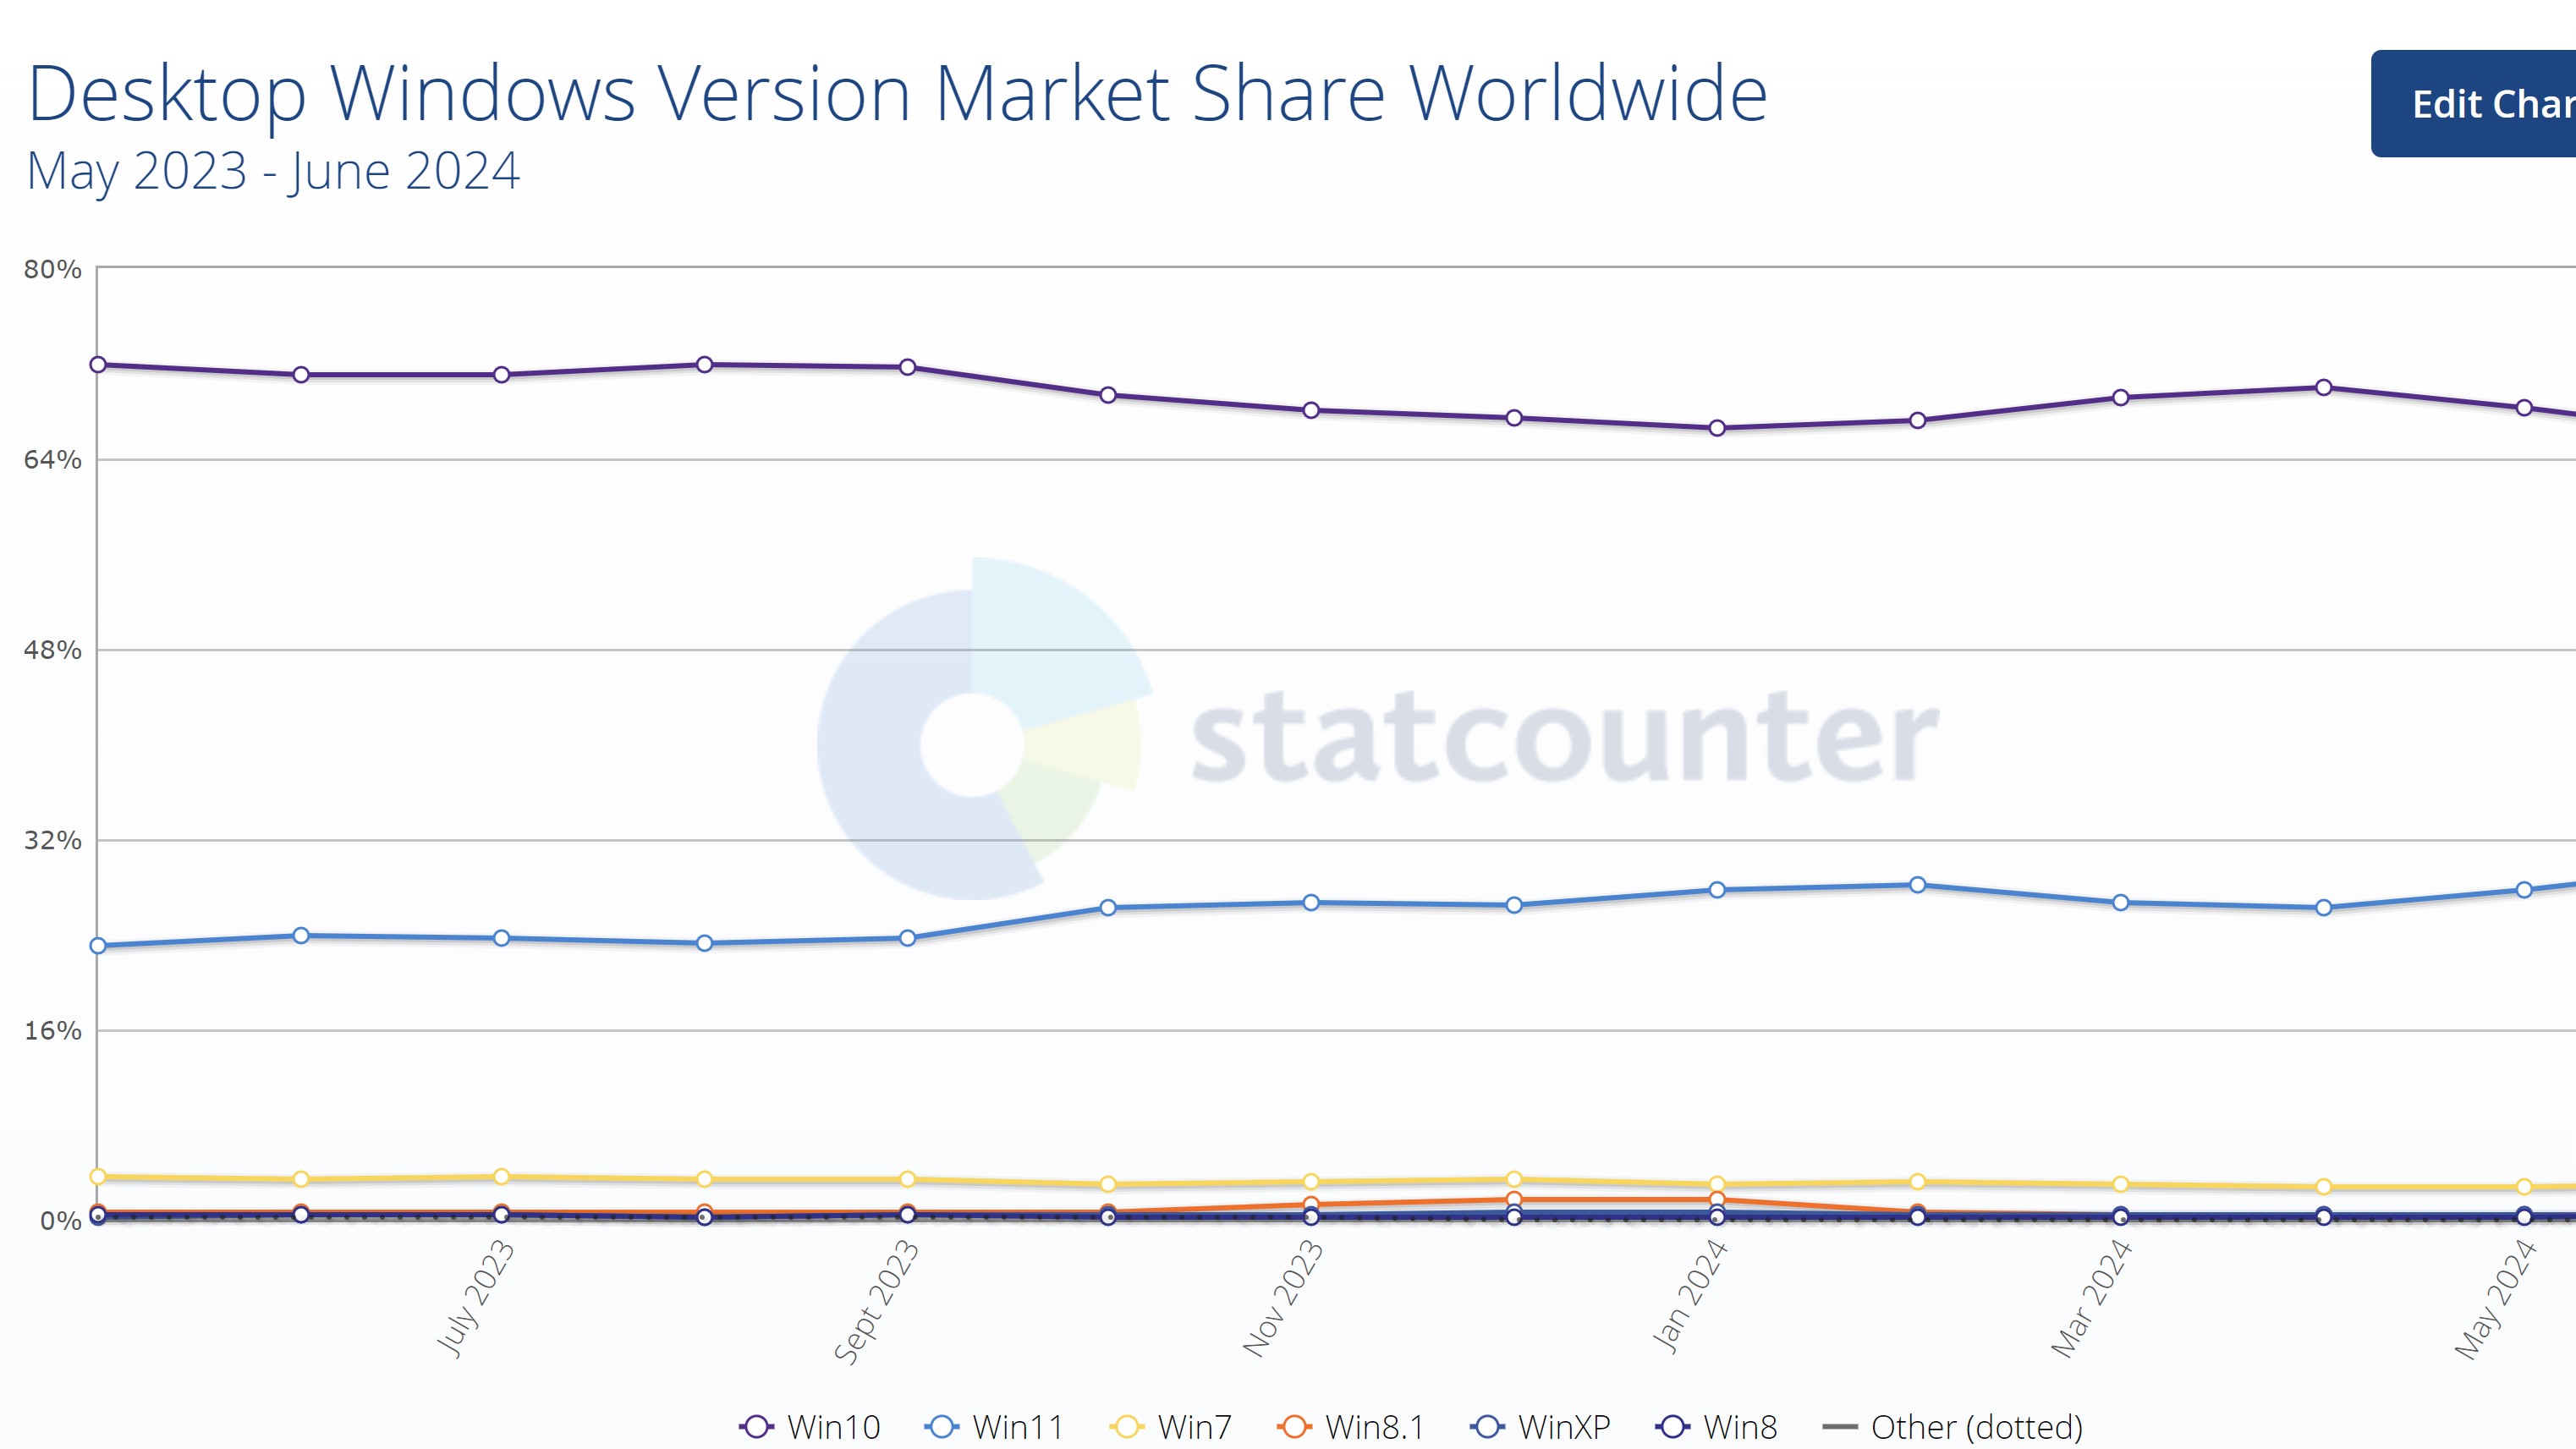 Statcounter market share report showing Windows 11 catching up to Windows 10.